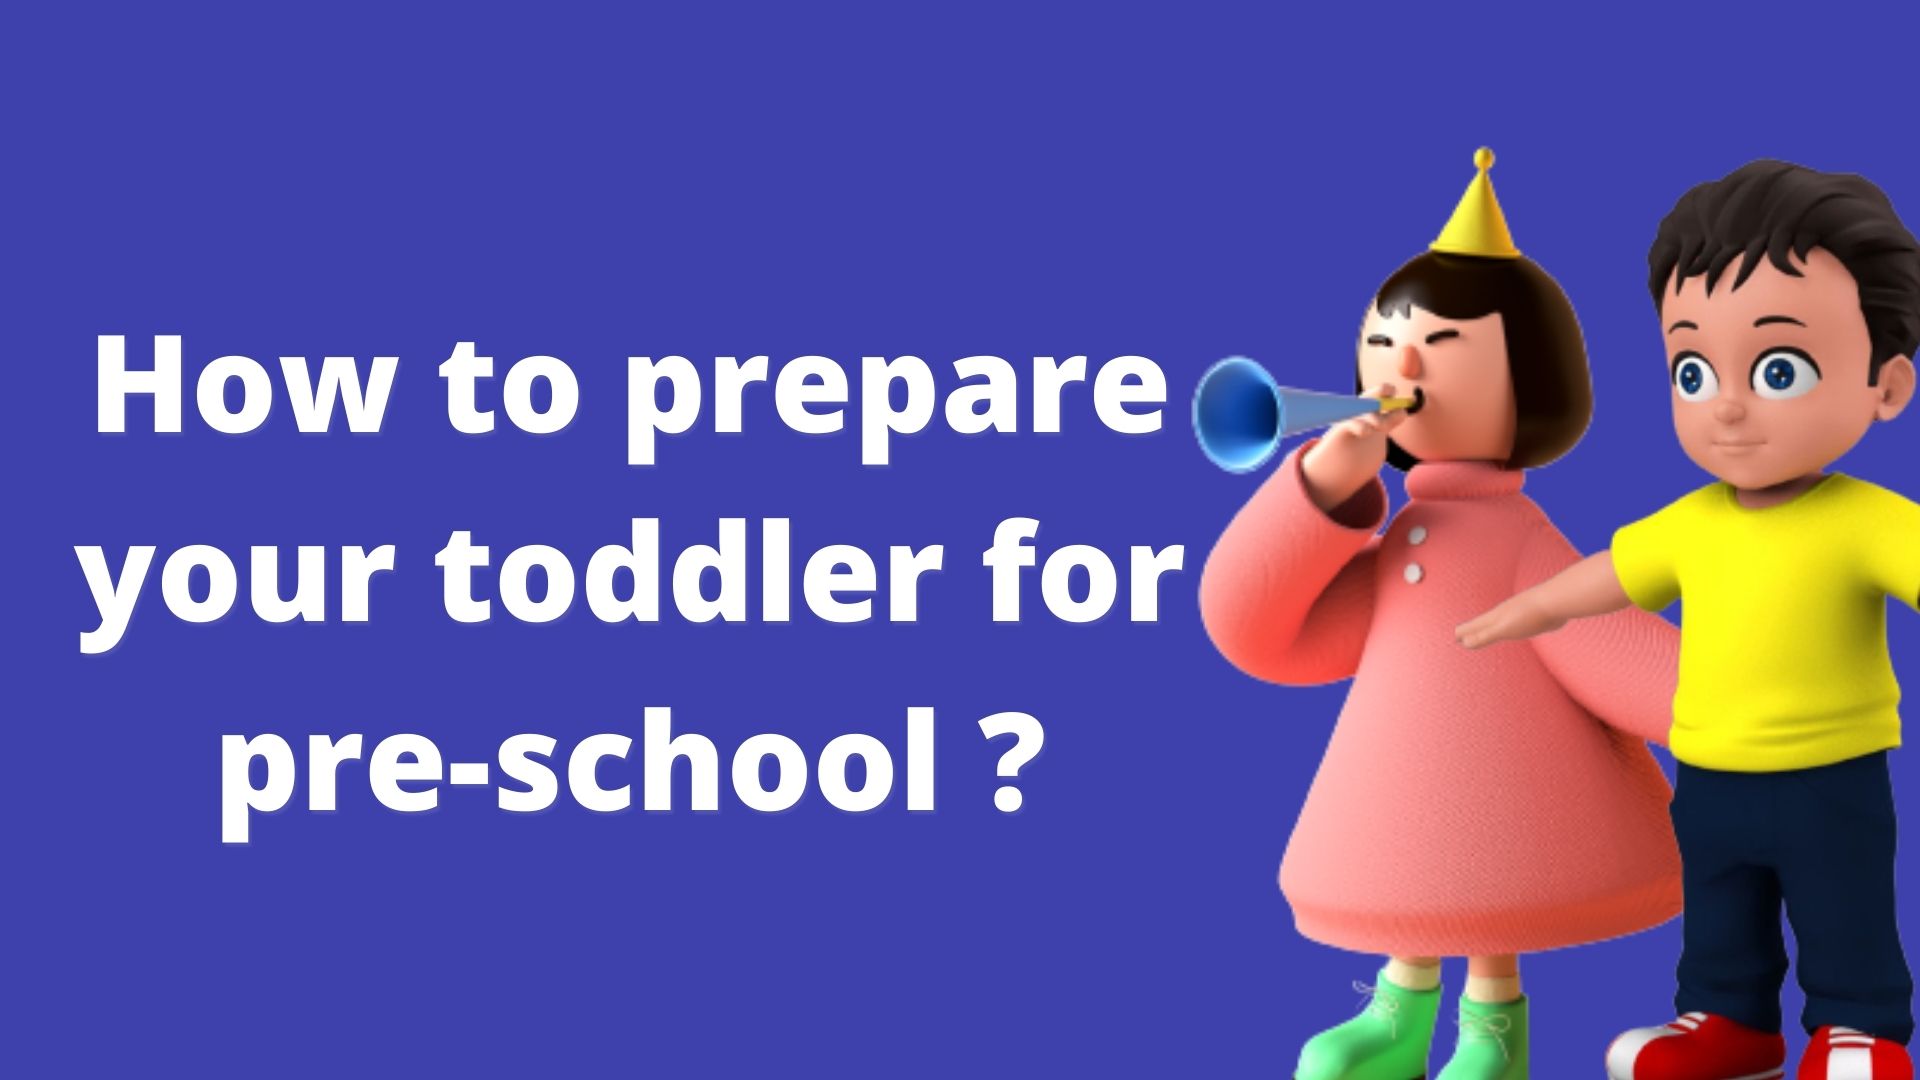 How to prepare your toddler for pre-school